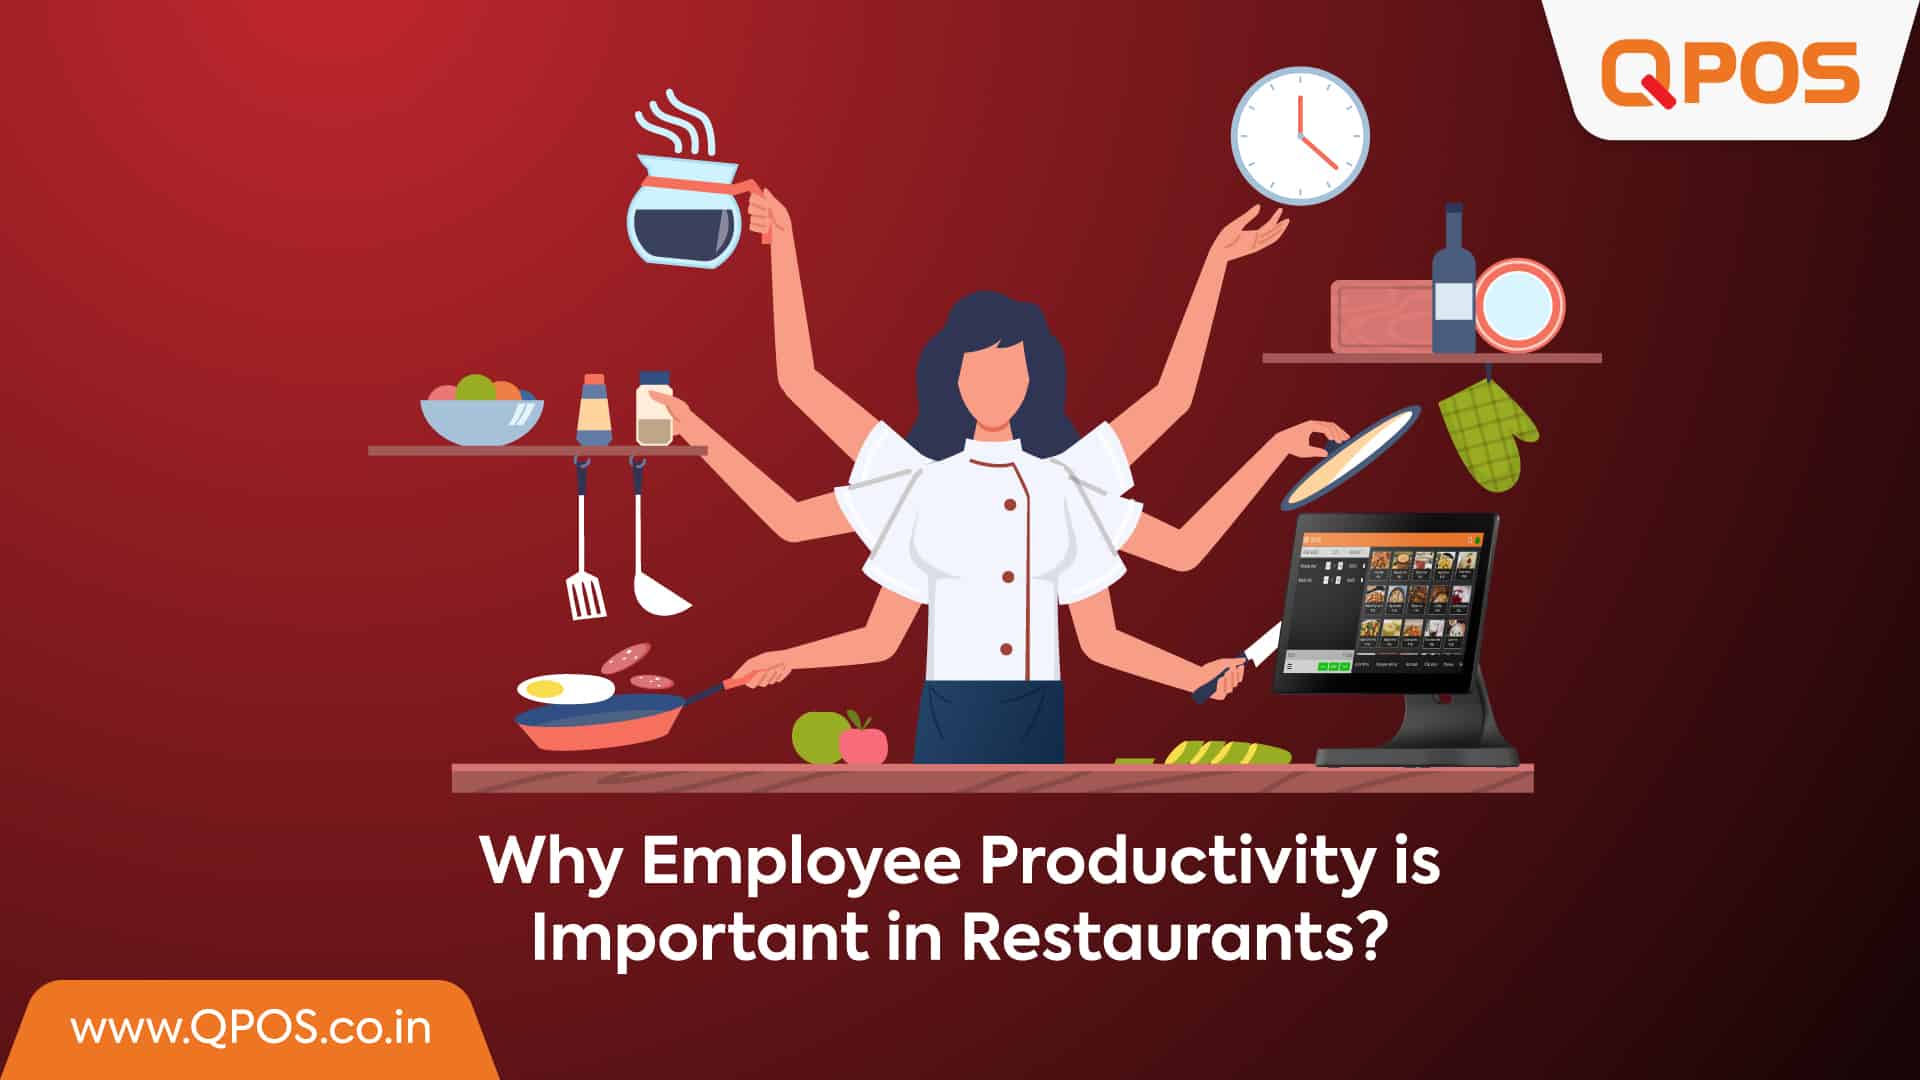 QPOS-Why Employee Productivity is Important in Restaurants?